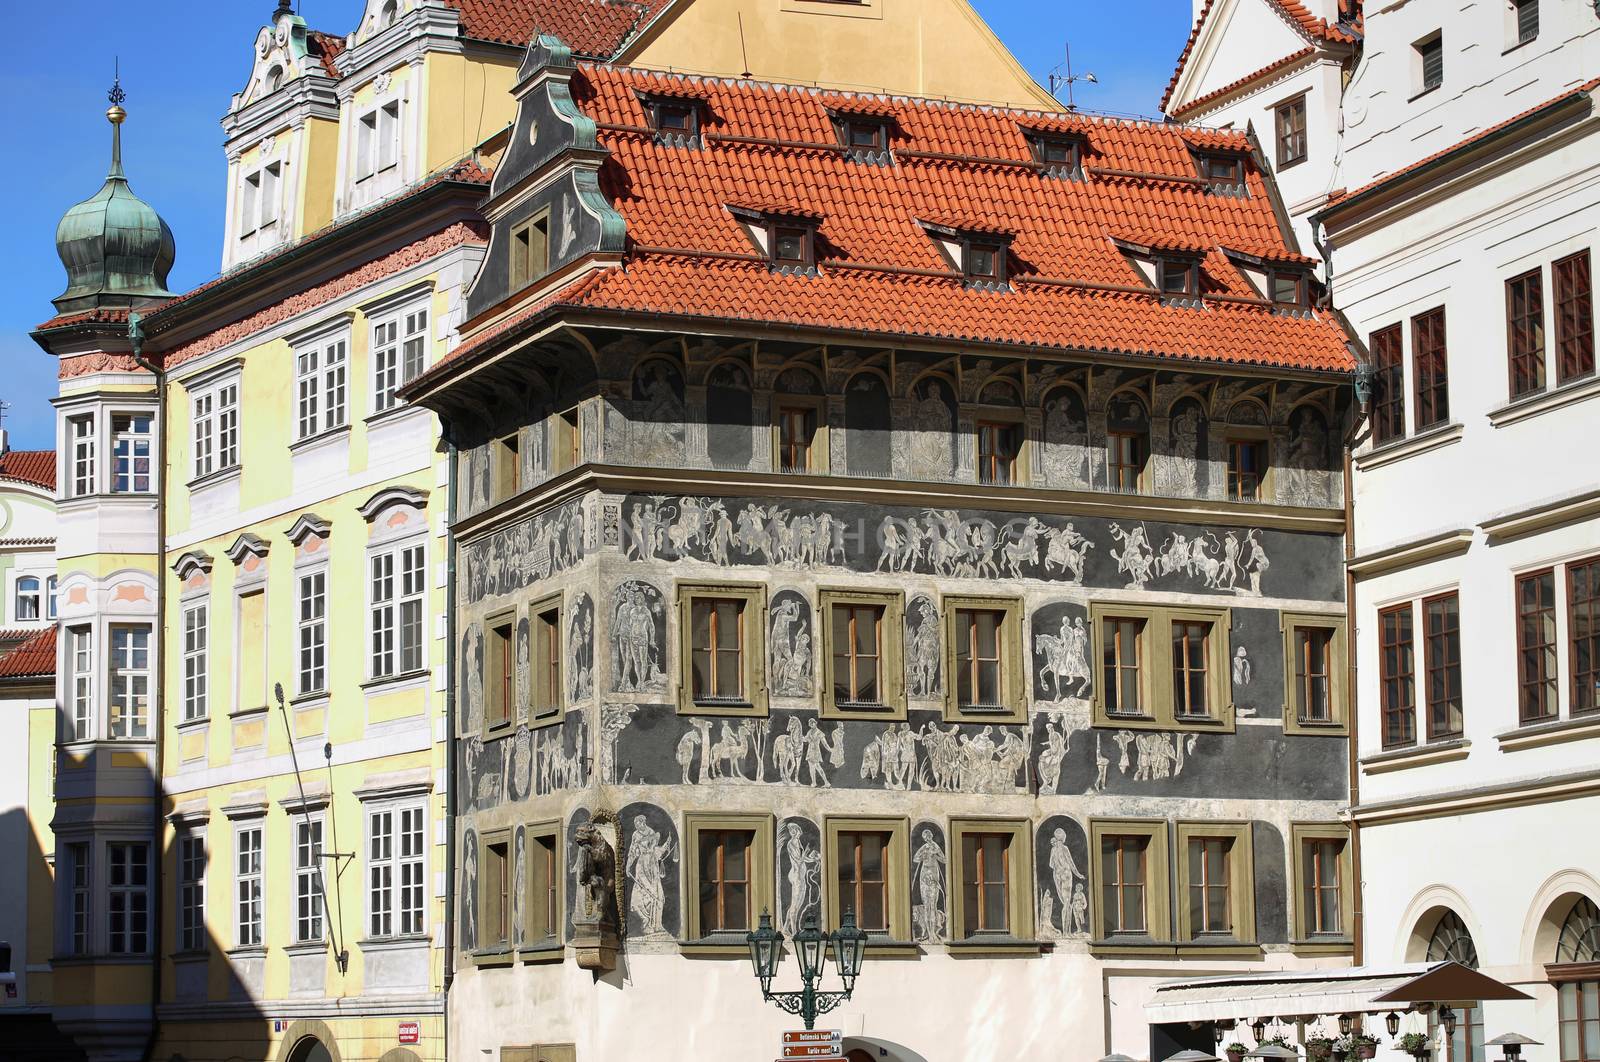 Renaissance "House under a minute" (dum U minuty), decorated with technique sgraffiti scenes from Greek mythology on Old Town Square in Prague, Czech Republic